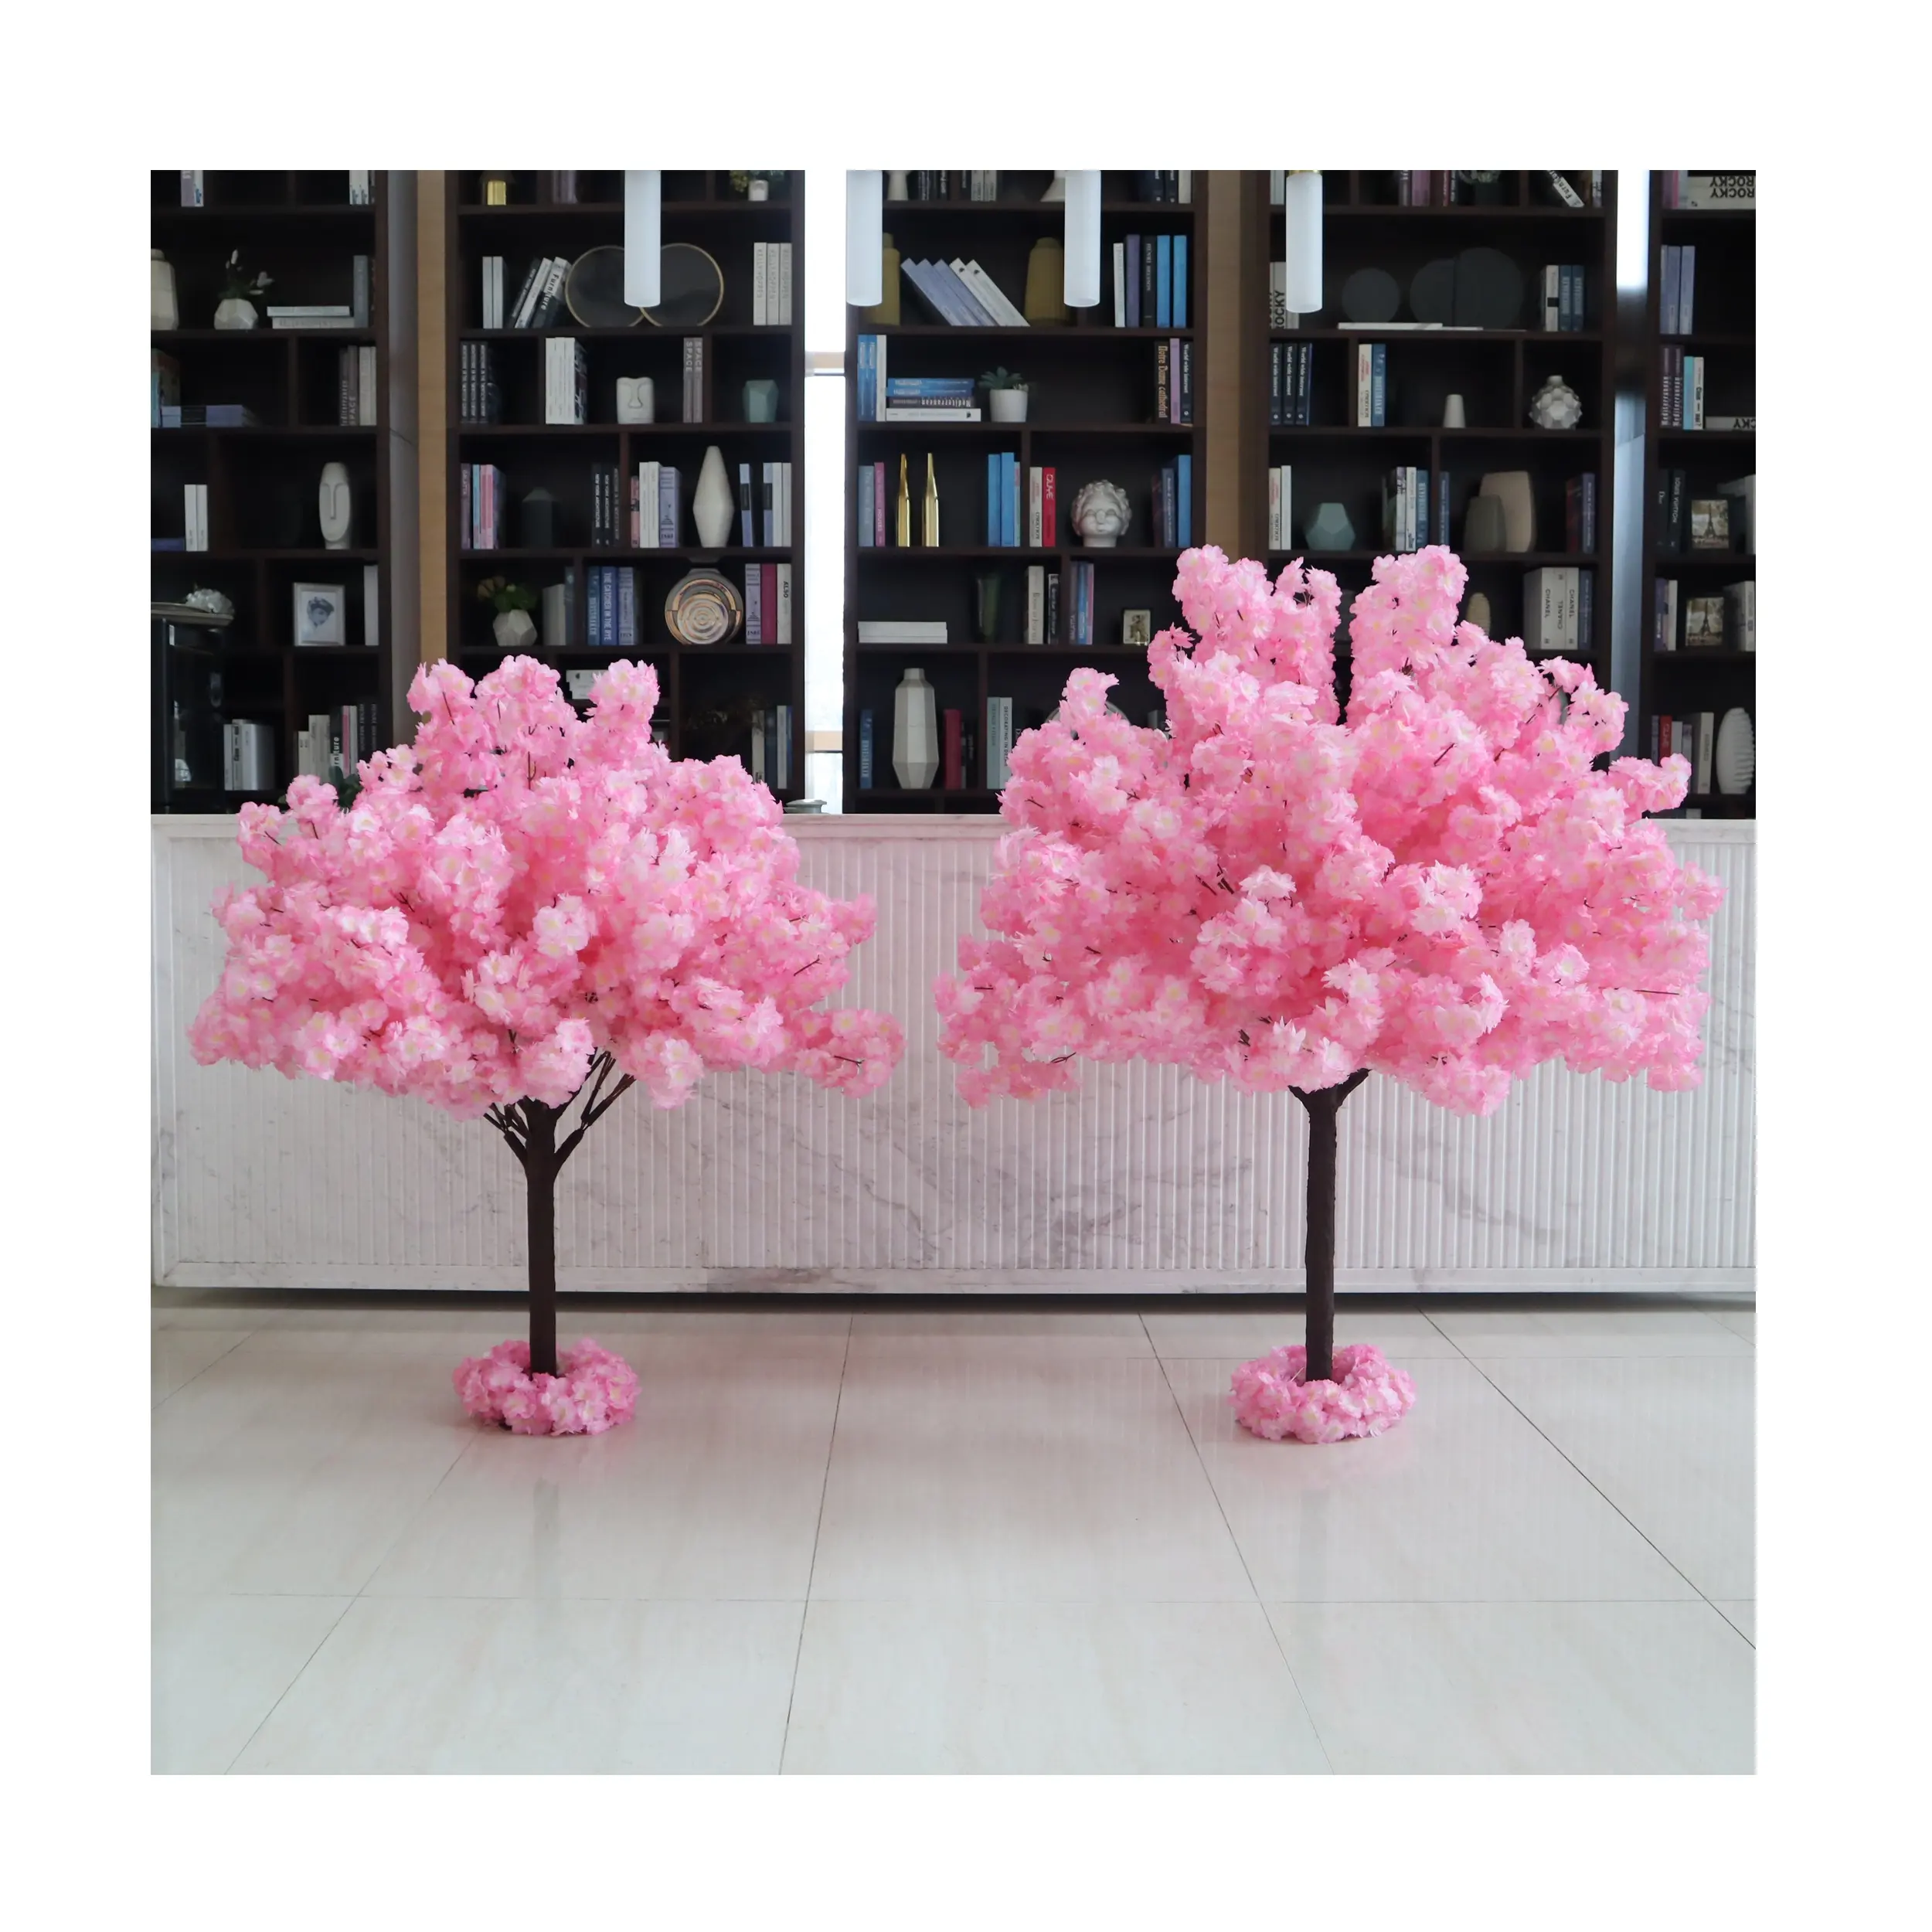 1.2M Bright Pink White Pink Hot Pink Salmon Artificial Fake Wishing Tree Flower Tabletop Cherry Blossom Tree For Wedding Decor